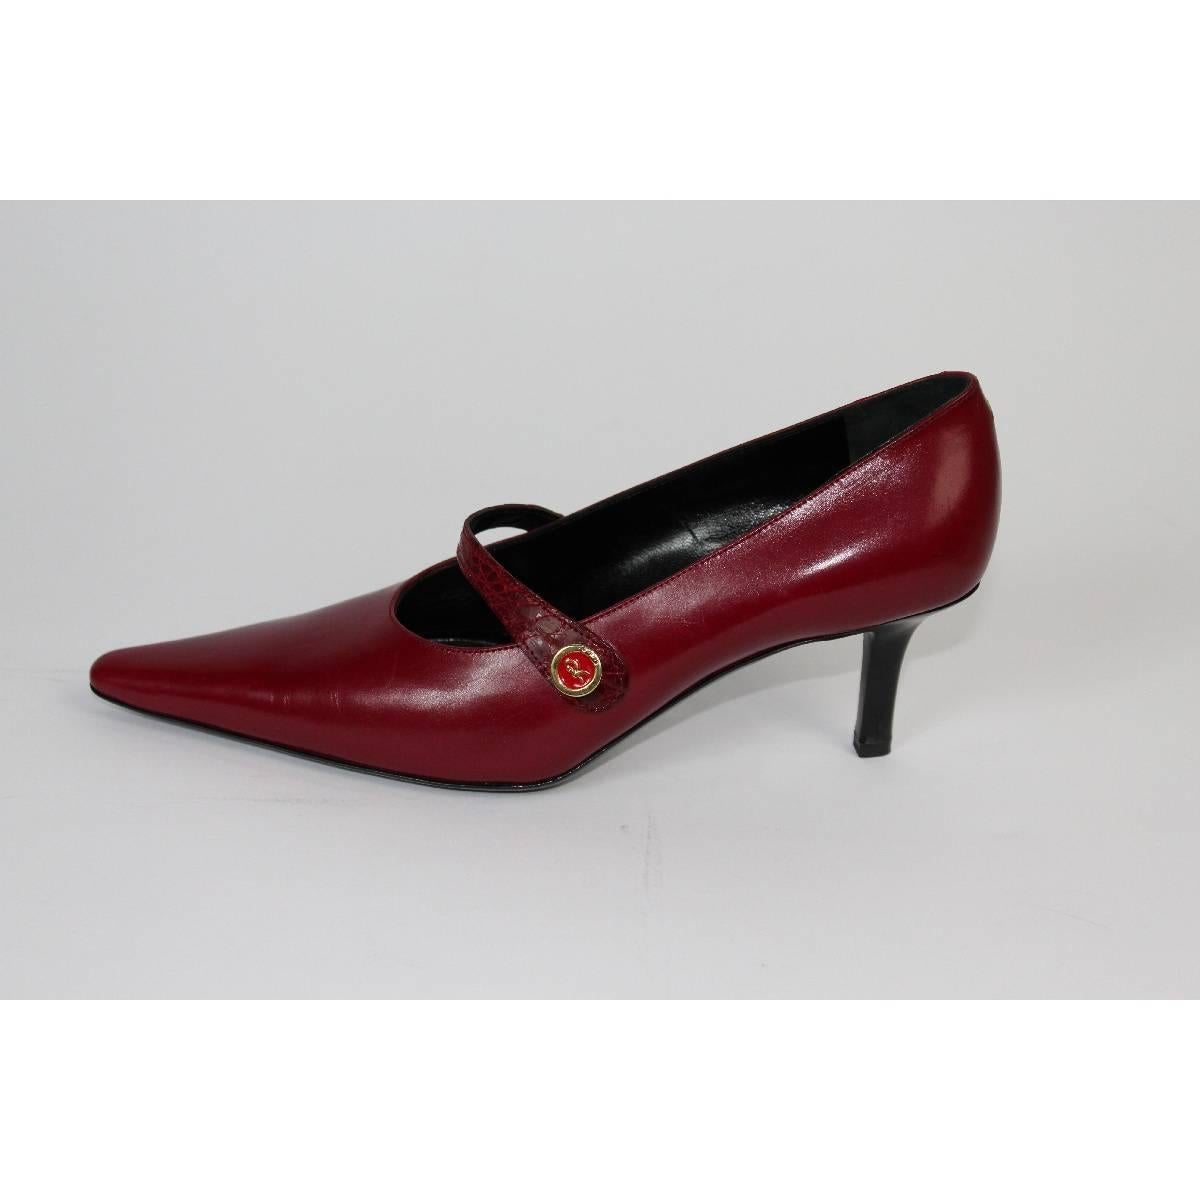 Roberta di Camerino vintage red pump hells shoes decolte. Size 35 1/2 in leather. Made in Italy, new never worn.

Model Code: 42 0304 508

Size: 35 1/2 Italy 5 1/2 Us 3 Uk

Hells hight: 7 cm